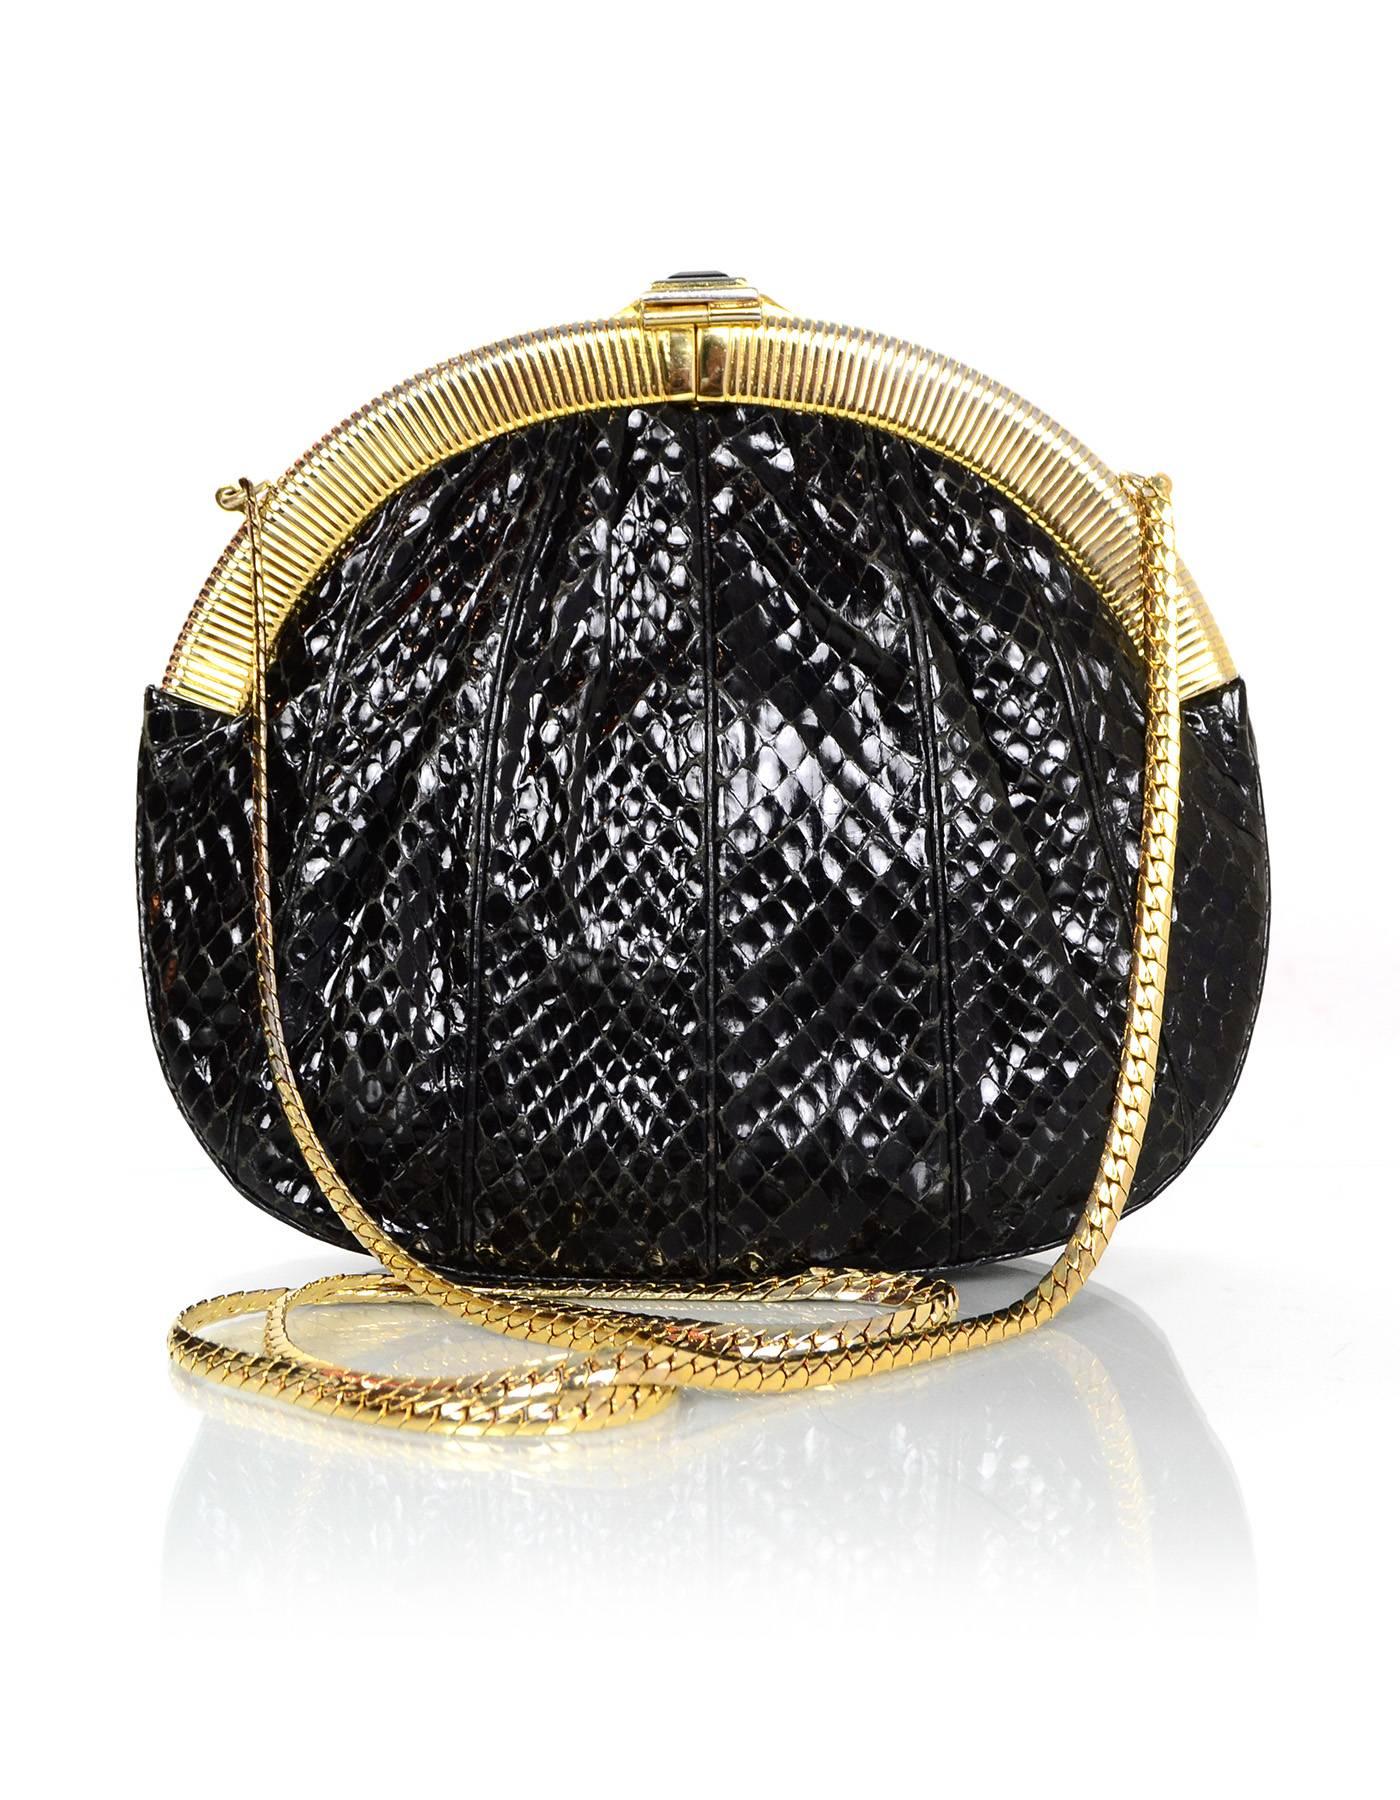 Judith Leiber Black Vintage Python Crossbody Evening Bag with Dust Bag In Excellent Condition In New York, NY